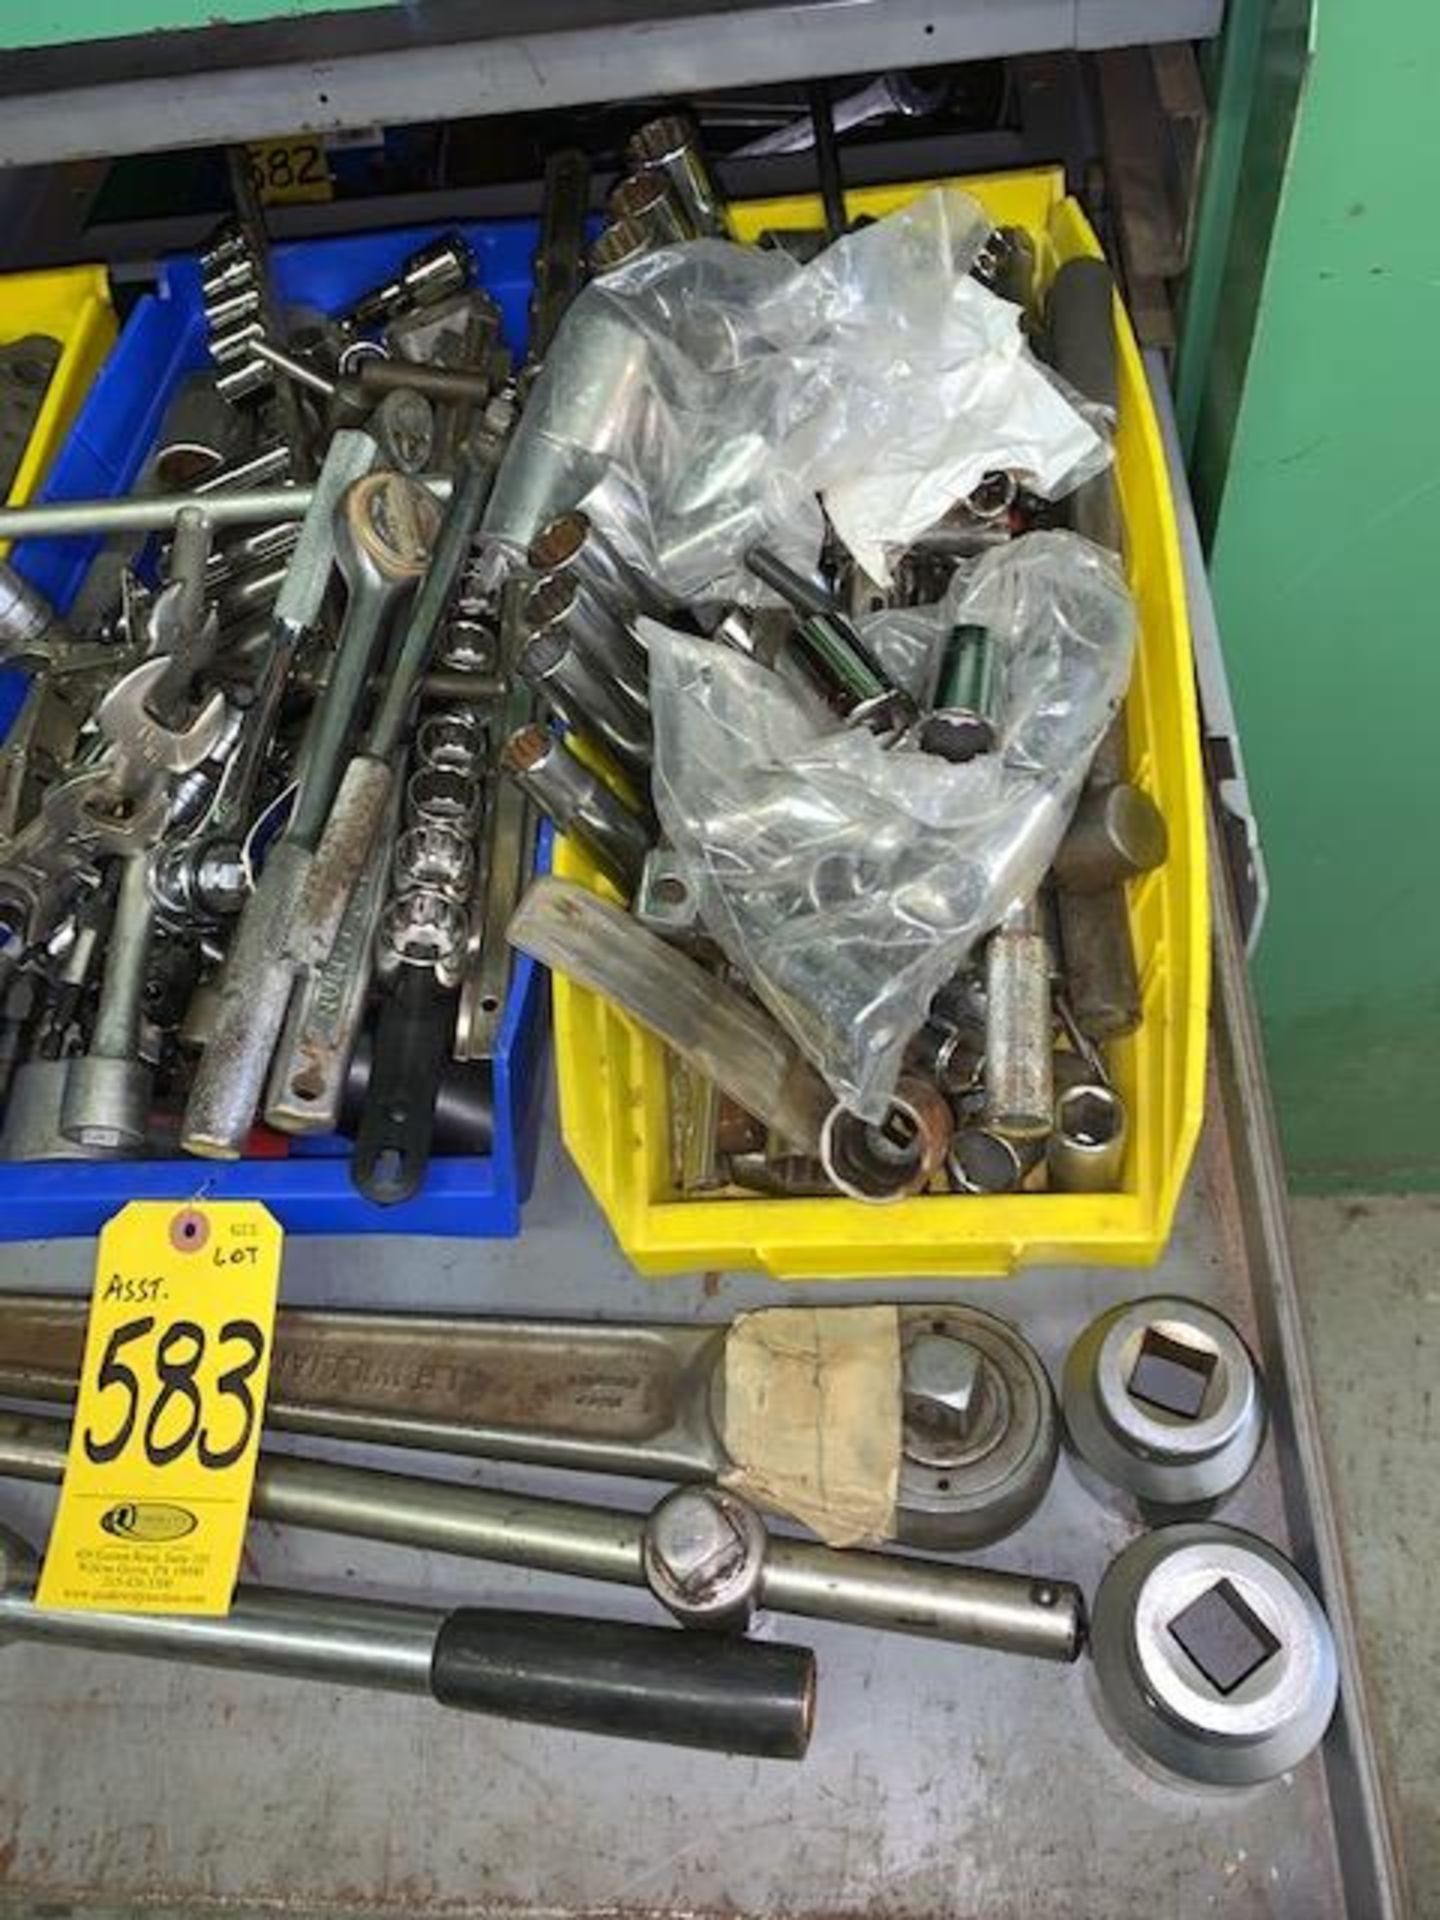 ASSORTED SOCKETS AND WRENCHES (2ND SHELF OF LOT 554 - LEFT SIDE) - Image 3 of 3